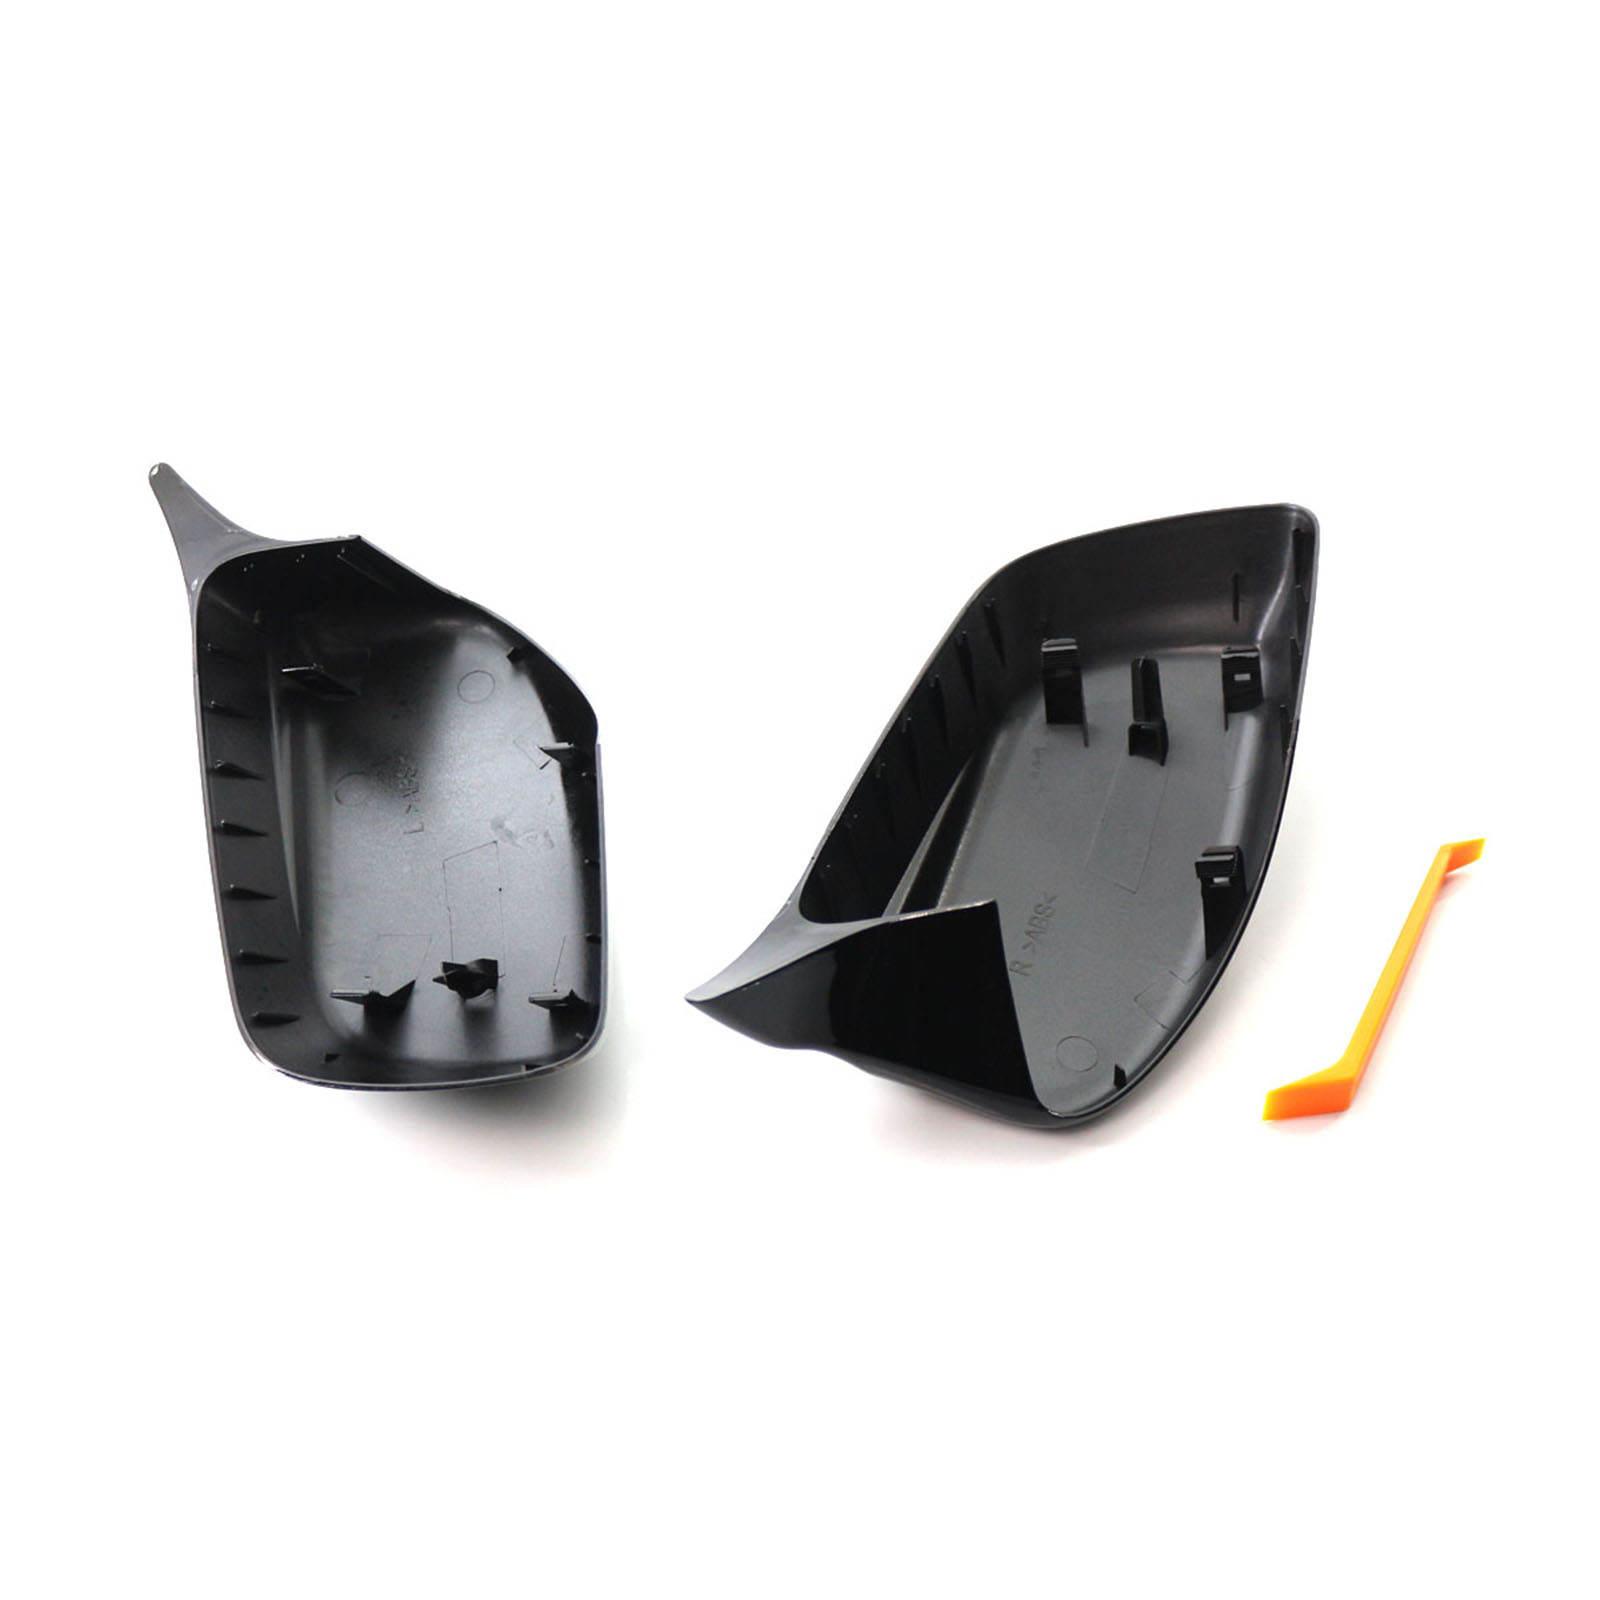 2 Pieces Black Side Mirror Covers Caps fits for BMW E60 5 Series 2004-2007